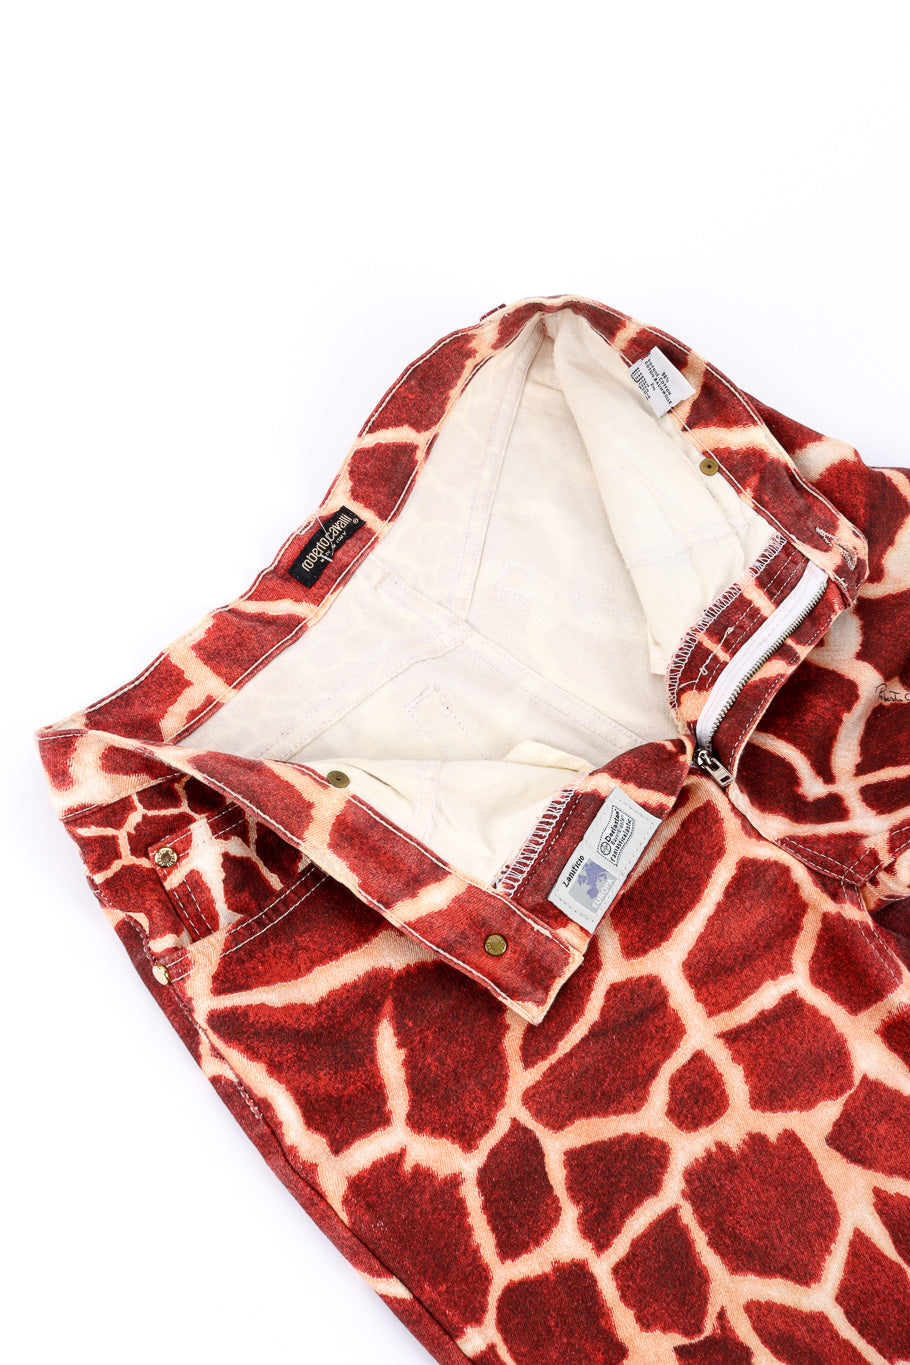 Vintage Roberto Cavalli Giraffe Print Flare Jeans unzipped with view of lining at waist @Recessla